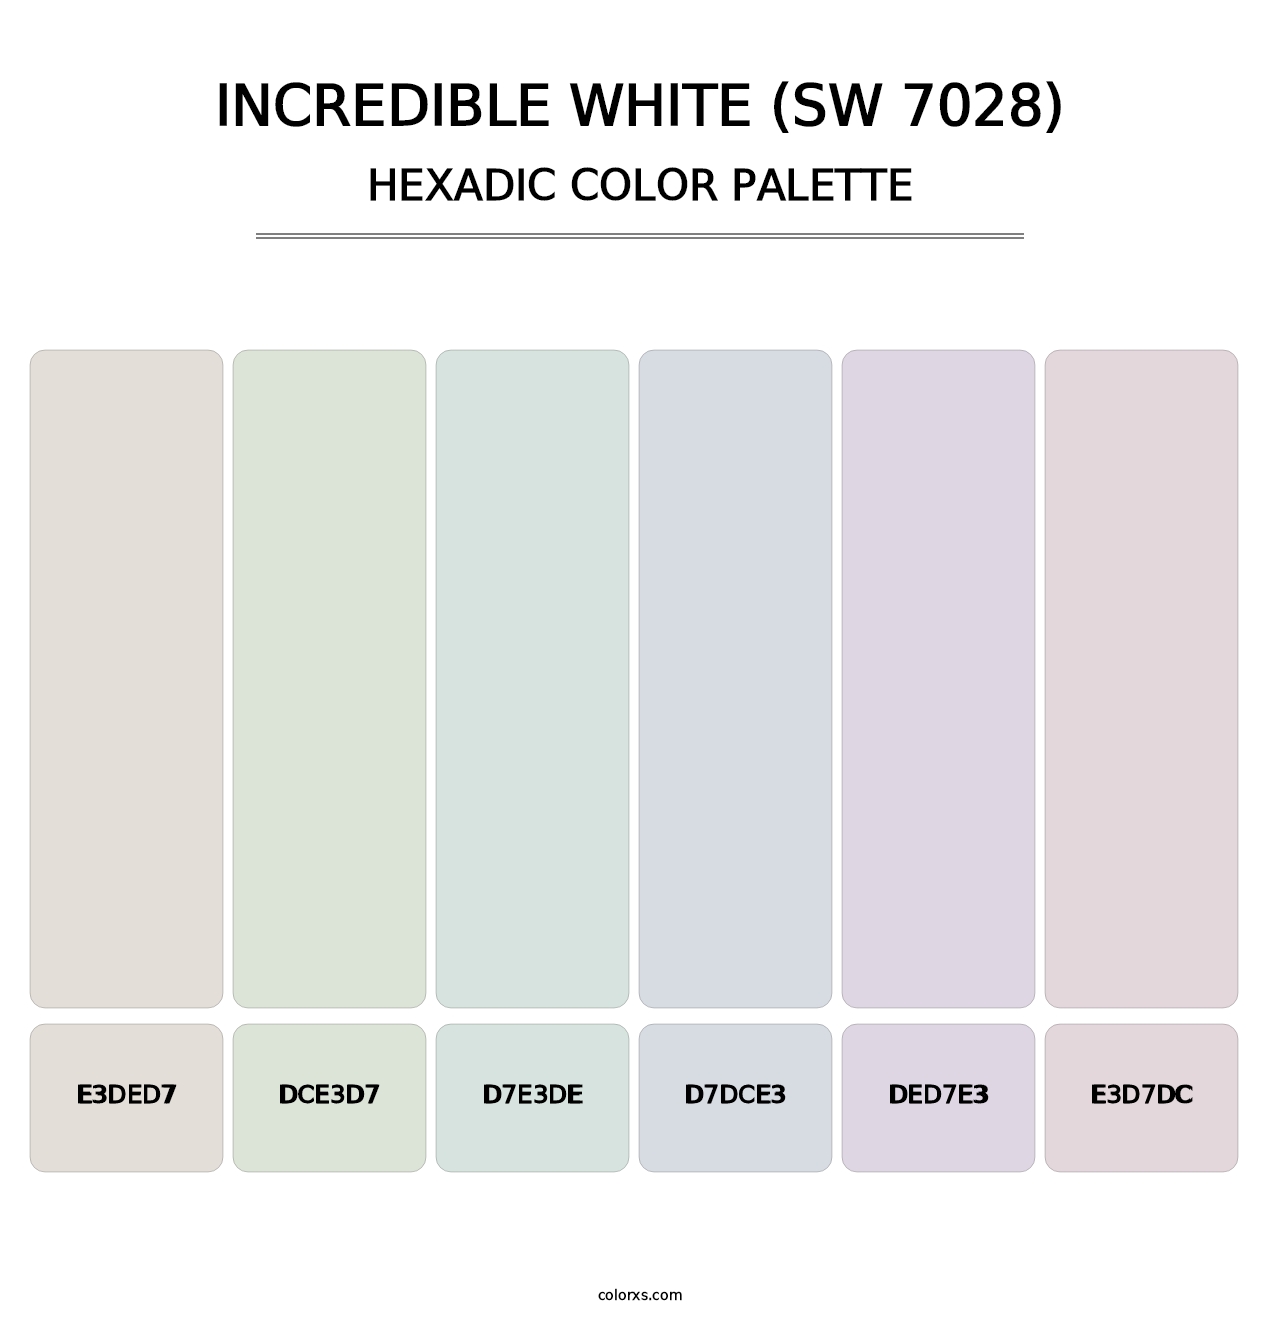 Incredible White (SW 7028) - Hexadic Color Palette